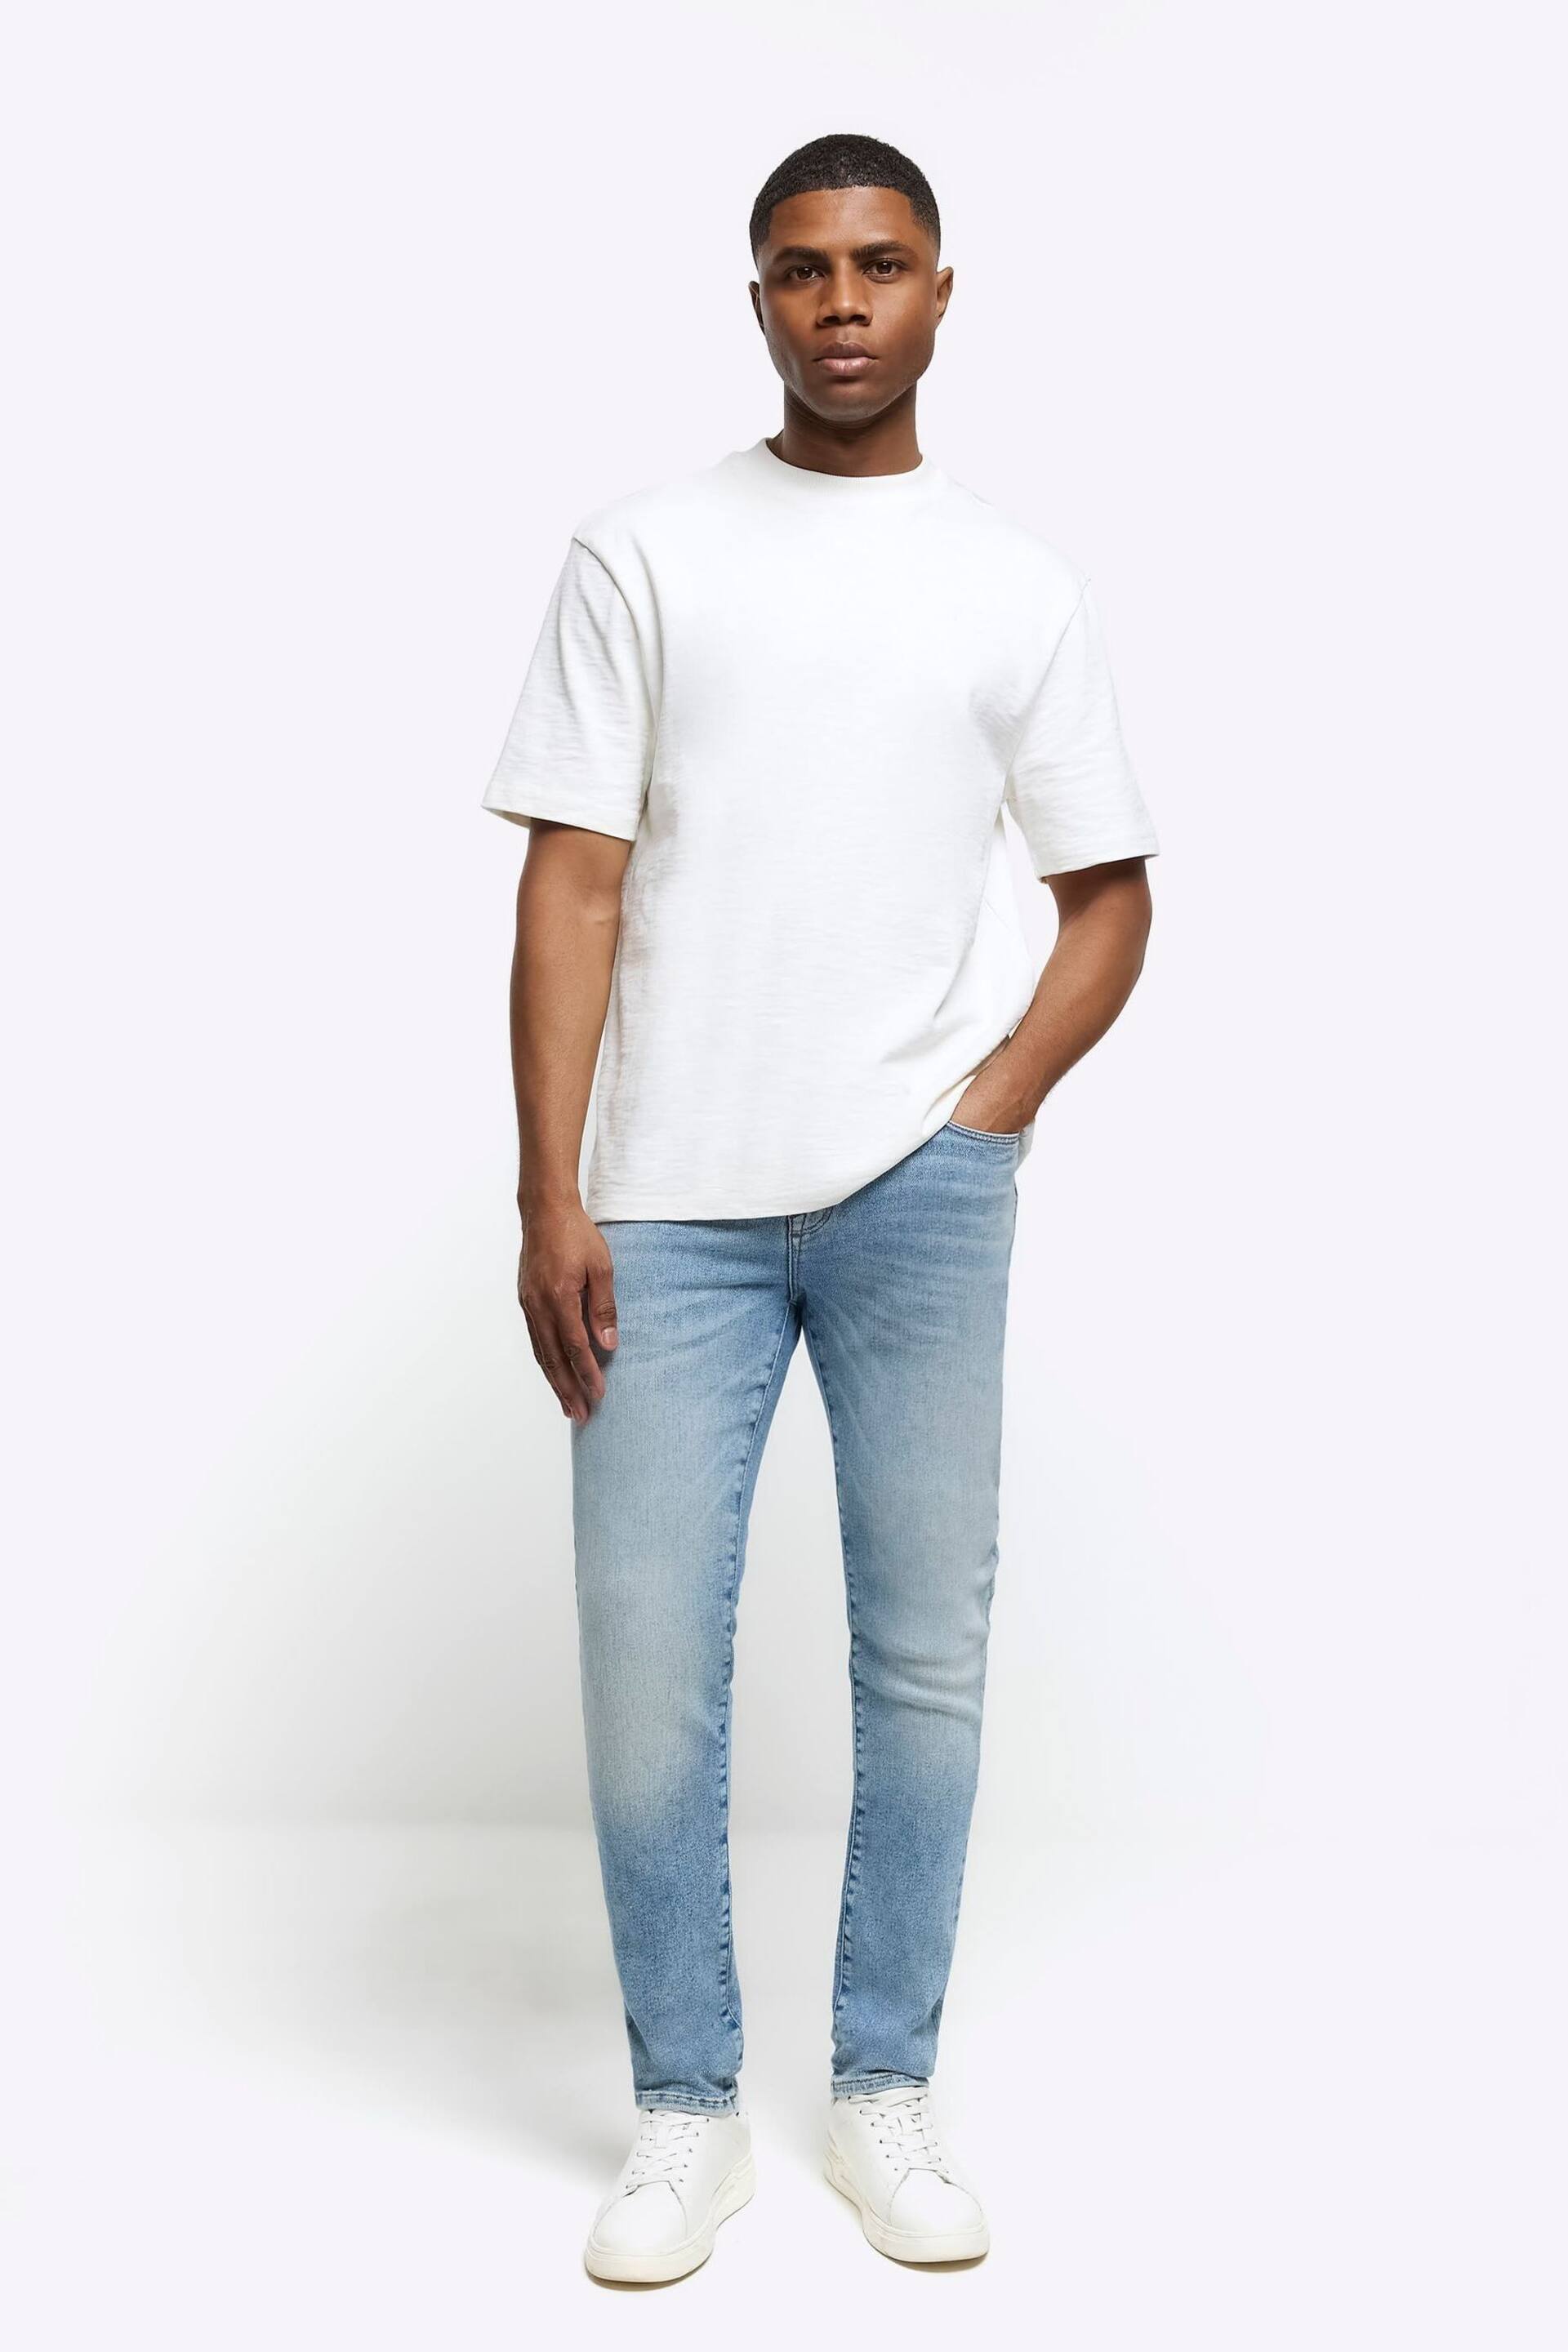 River Island Blue Skinny Fit Jeans - Image 1 of 4